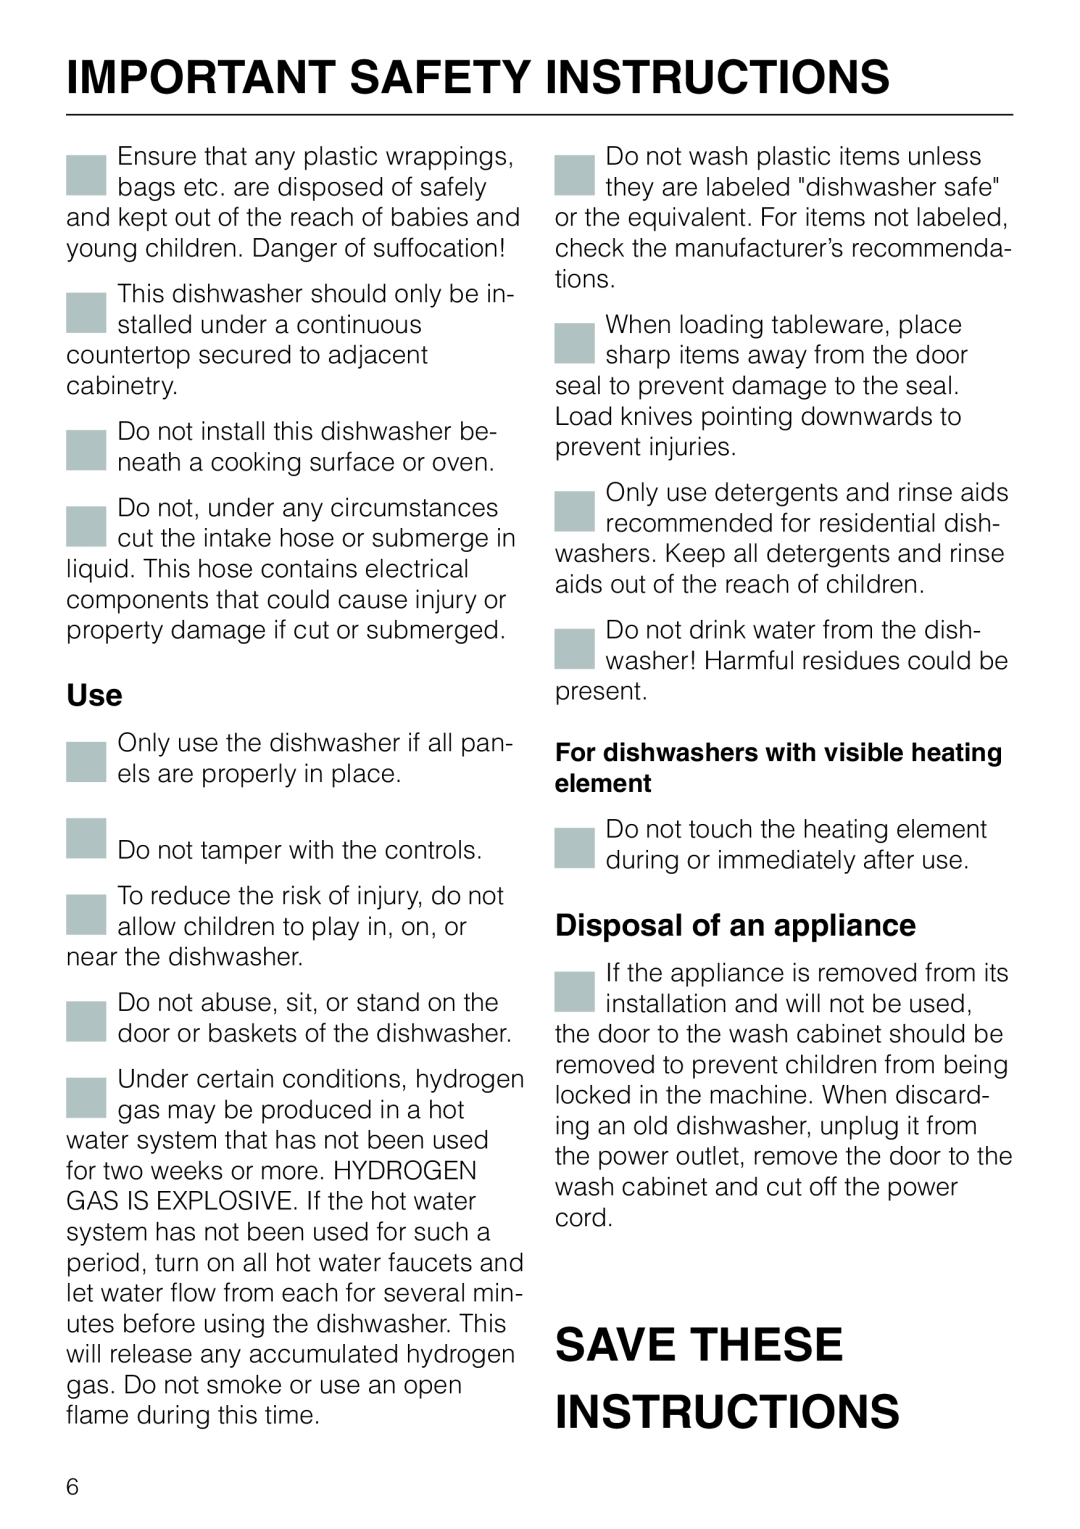 Miele G 851 operating instructions Save These Instructions, Disposal of an appliance, Important Safety Instructions 